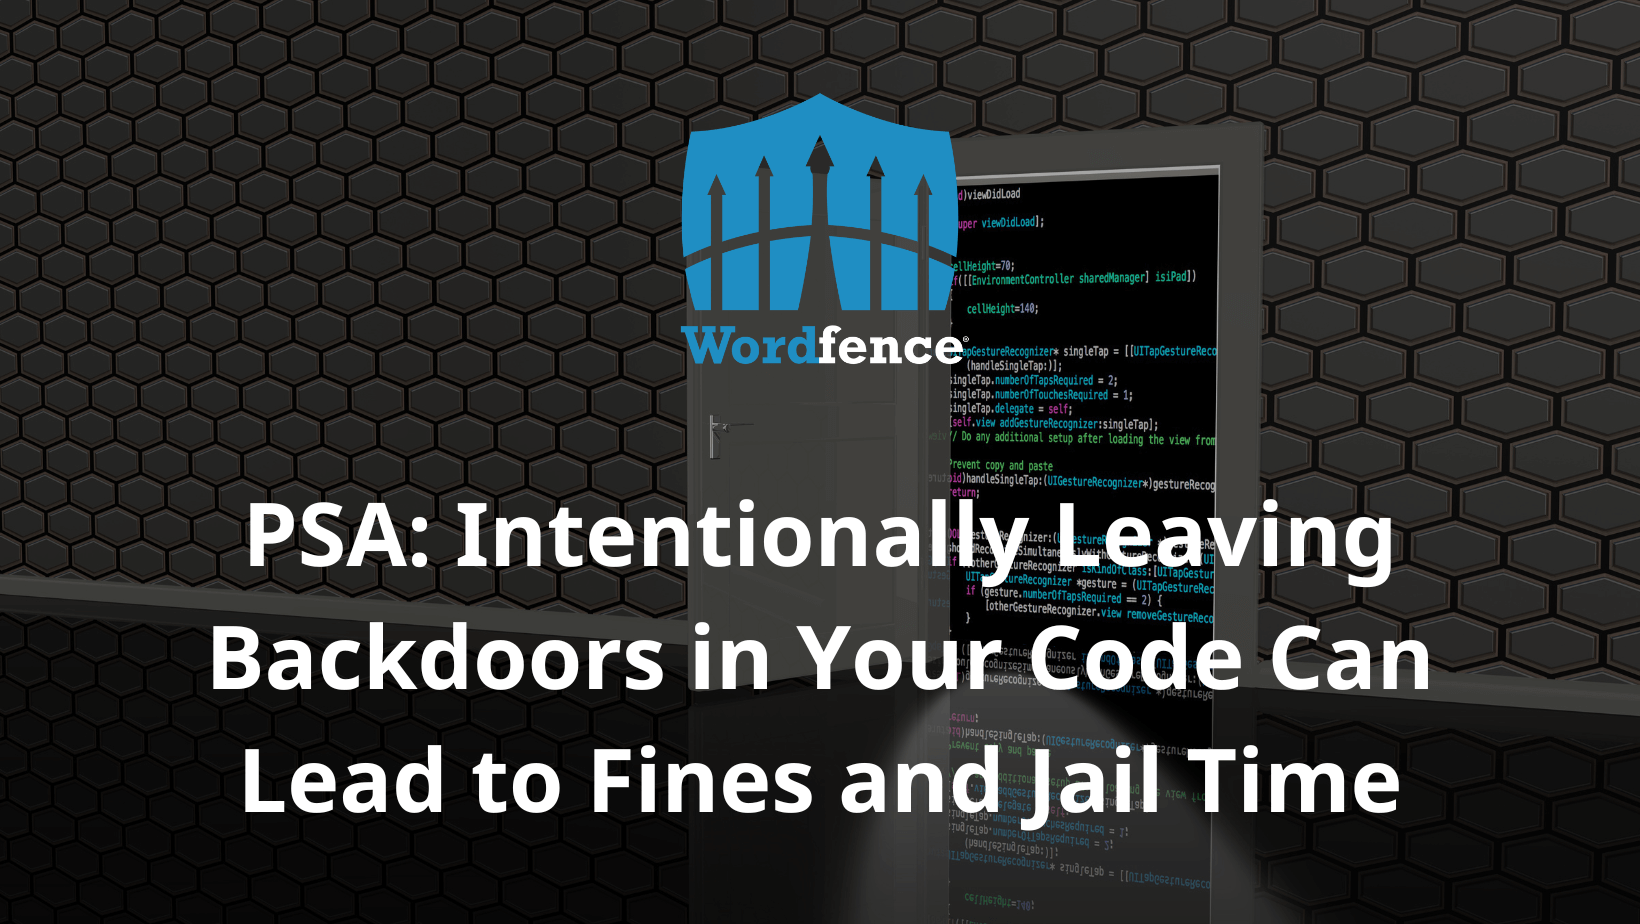 PSA: Intentionally Leaving Backdoors in Your Code Can Lead to Fines and Jail Time